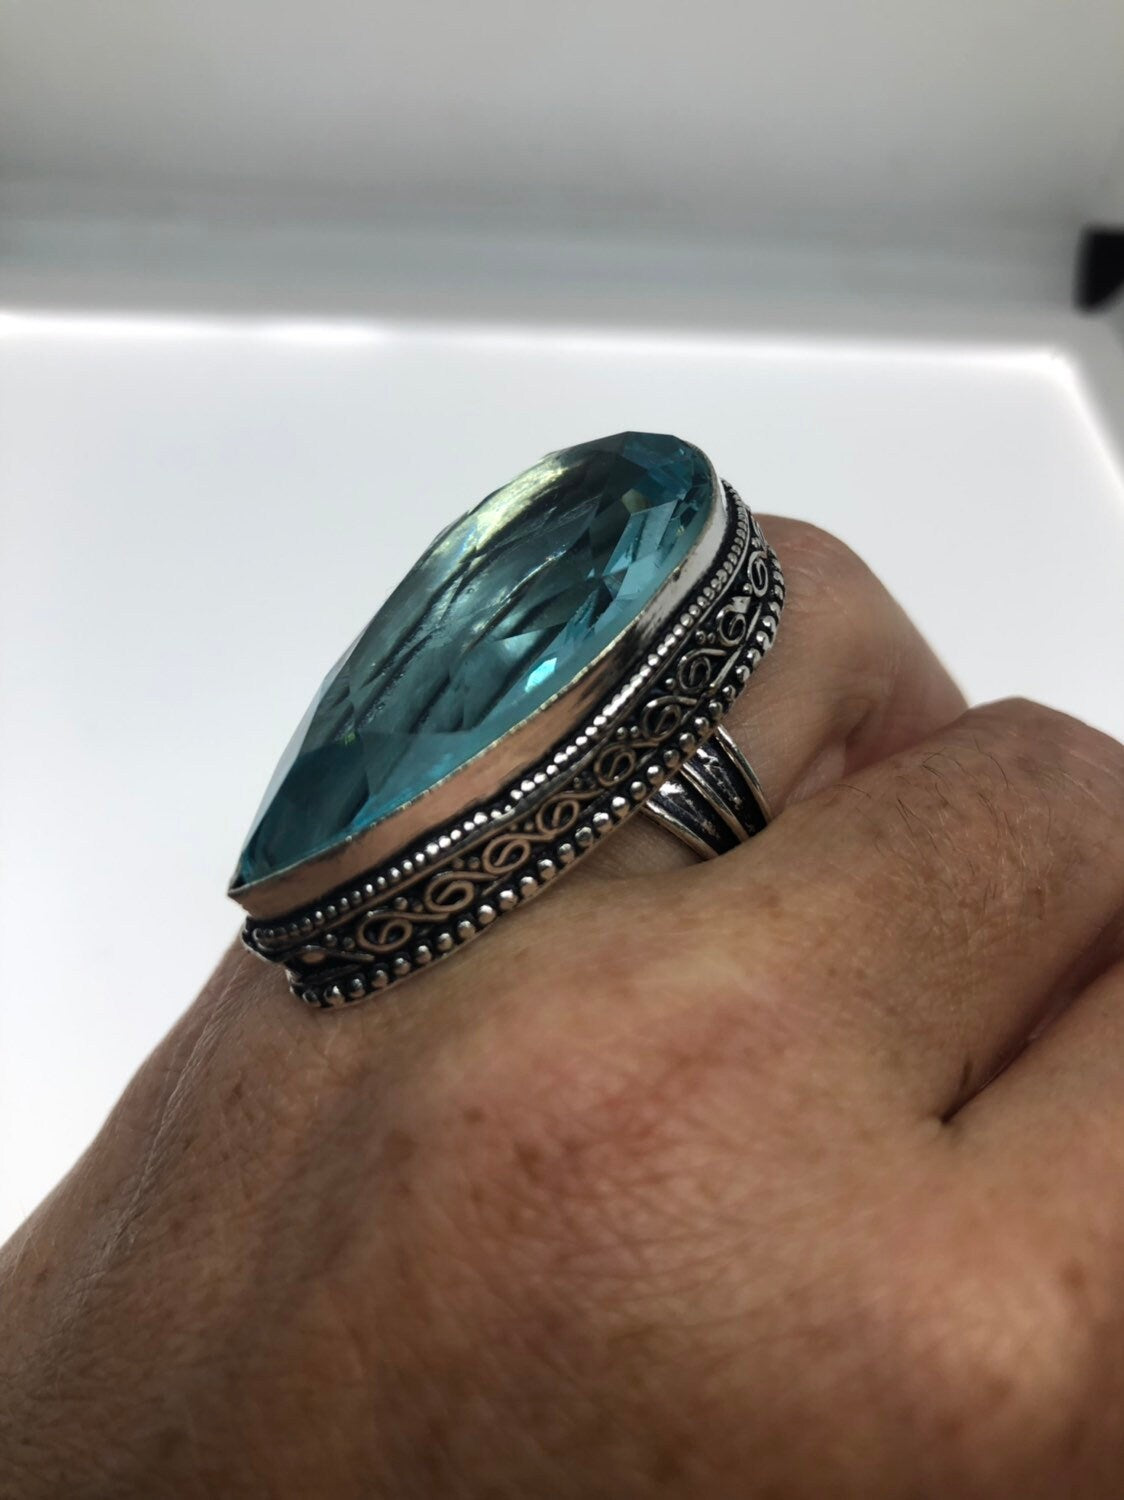 Vintage Aqua Vintage Art Glass Ring About 1.5 Inches Knuckle Ring